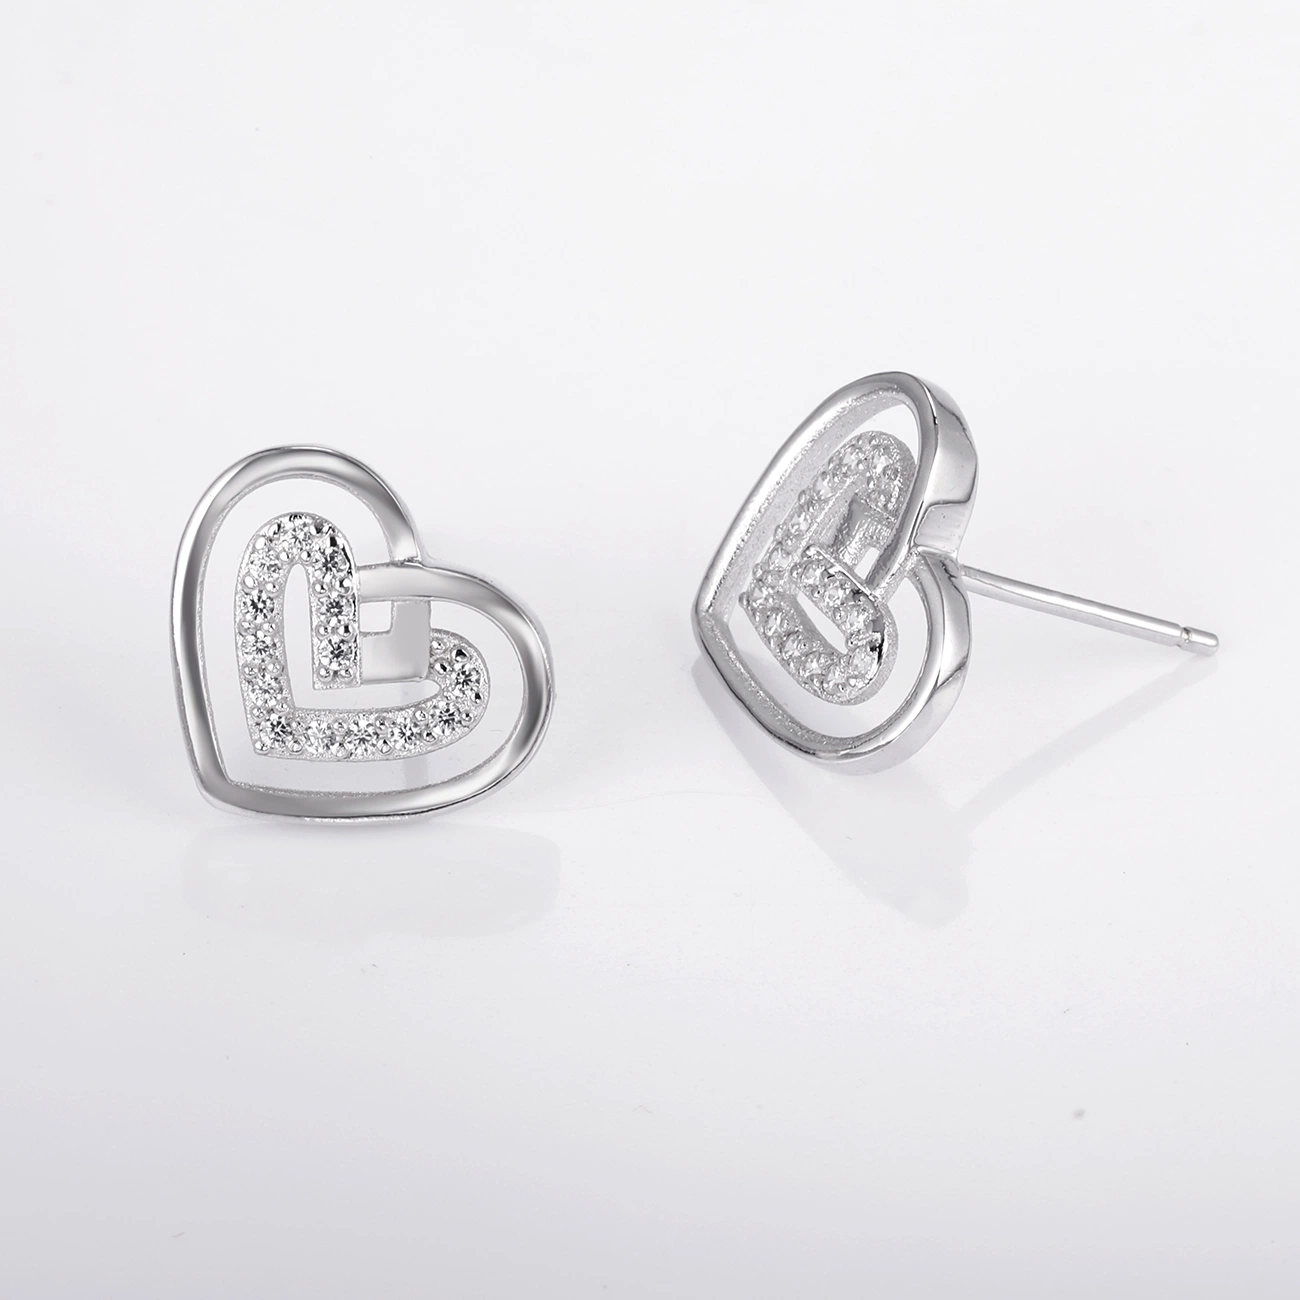 High quality/High cost performance Jewelry 925 Sterling Silver Heart Earring with CZ Stone